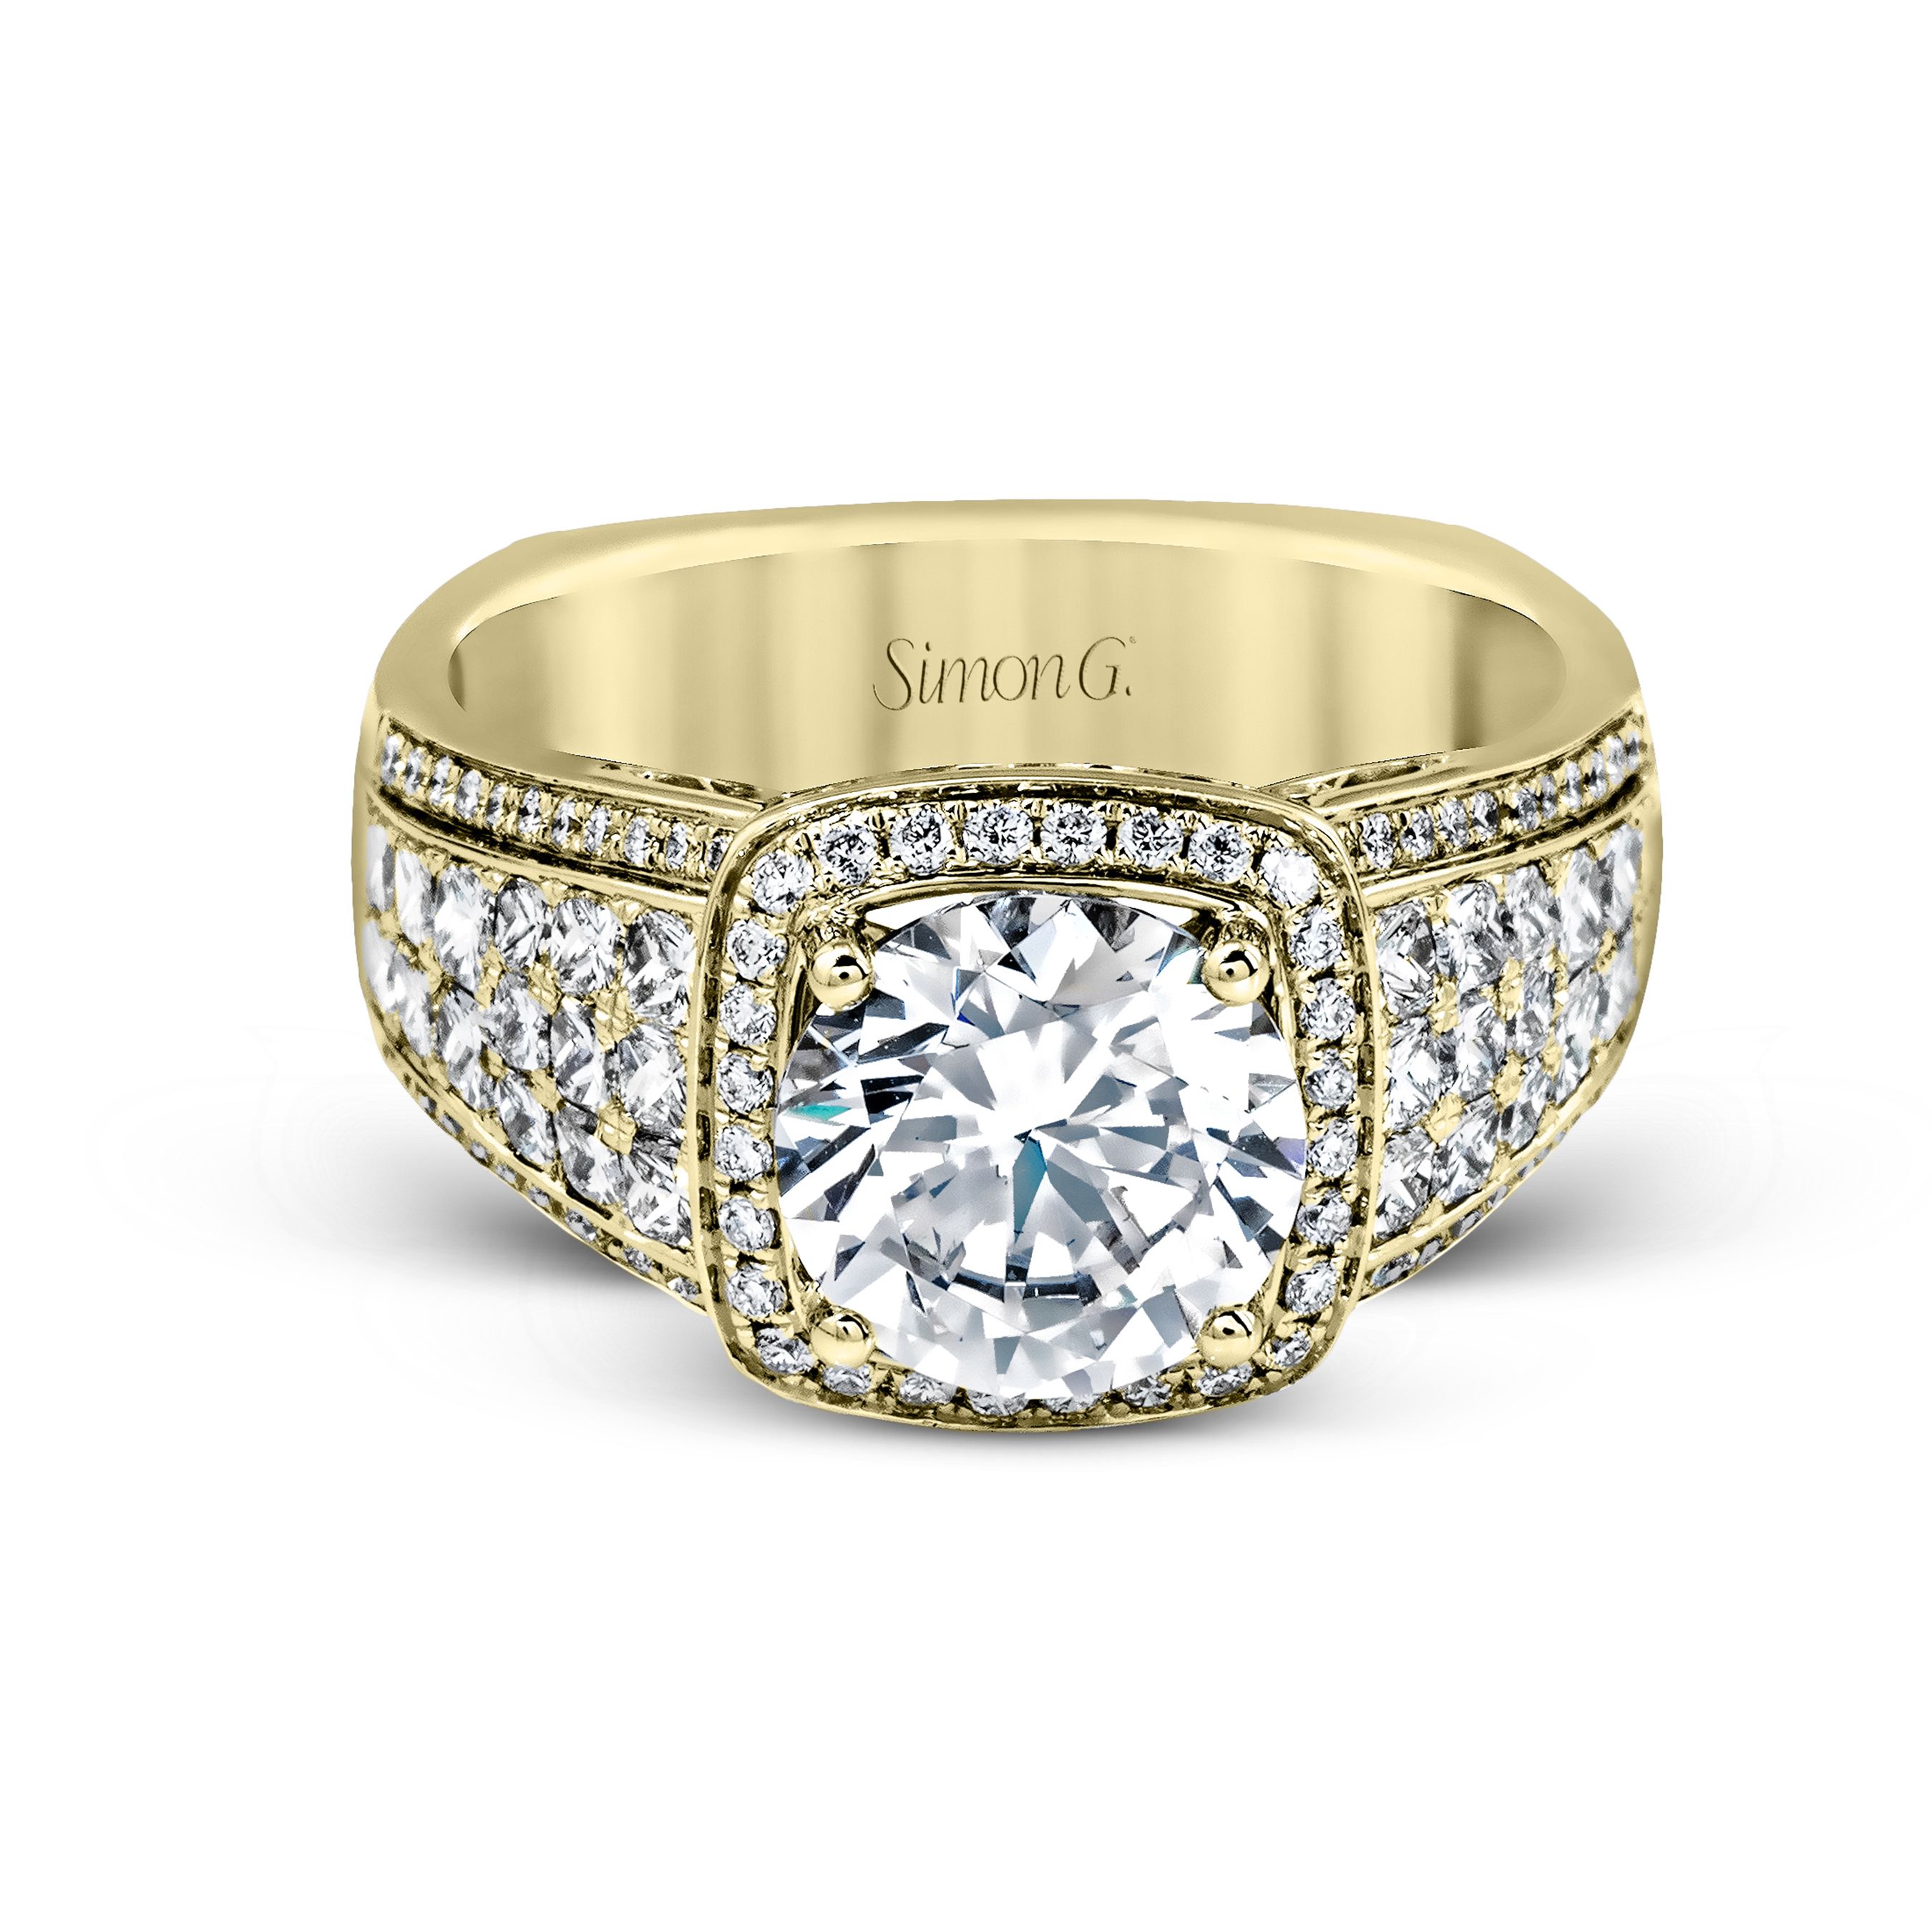 MR2515 Nocturnal Sophistication Collection Yellow Gold Round Cut Engagement Ring